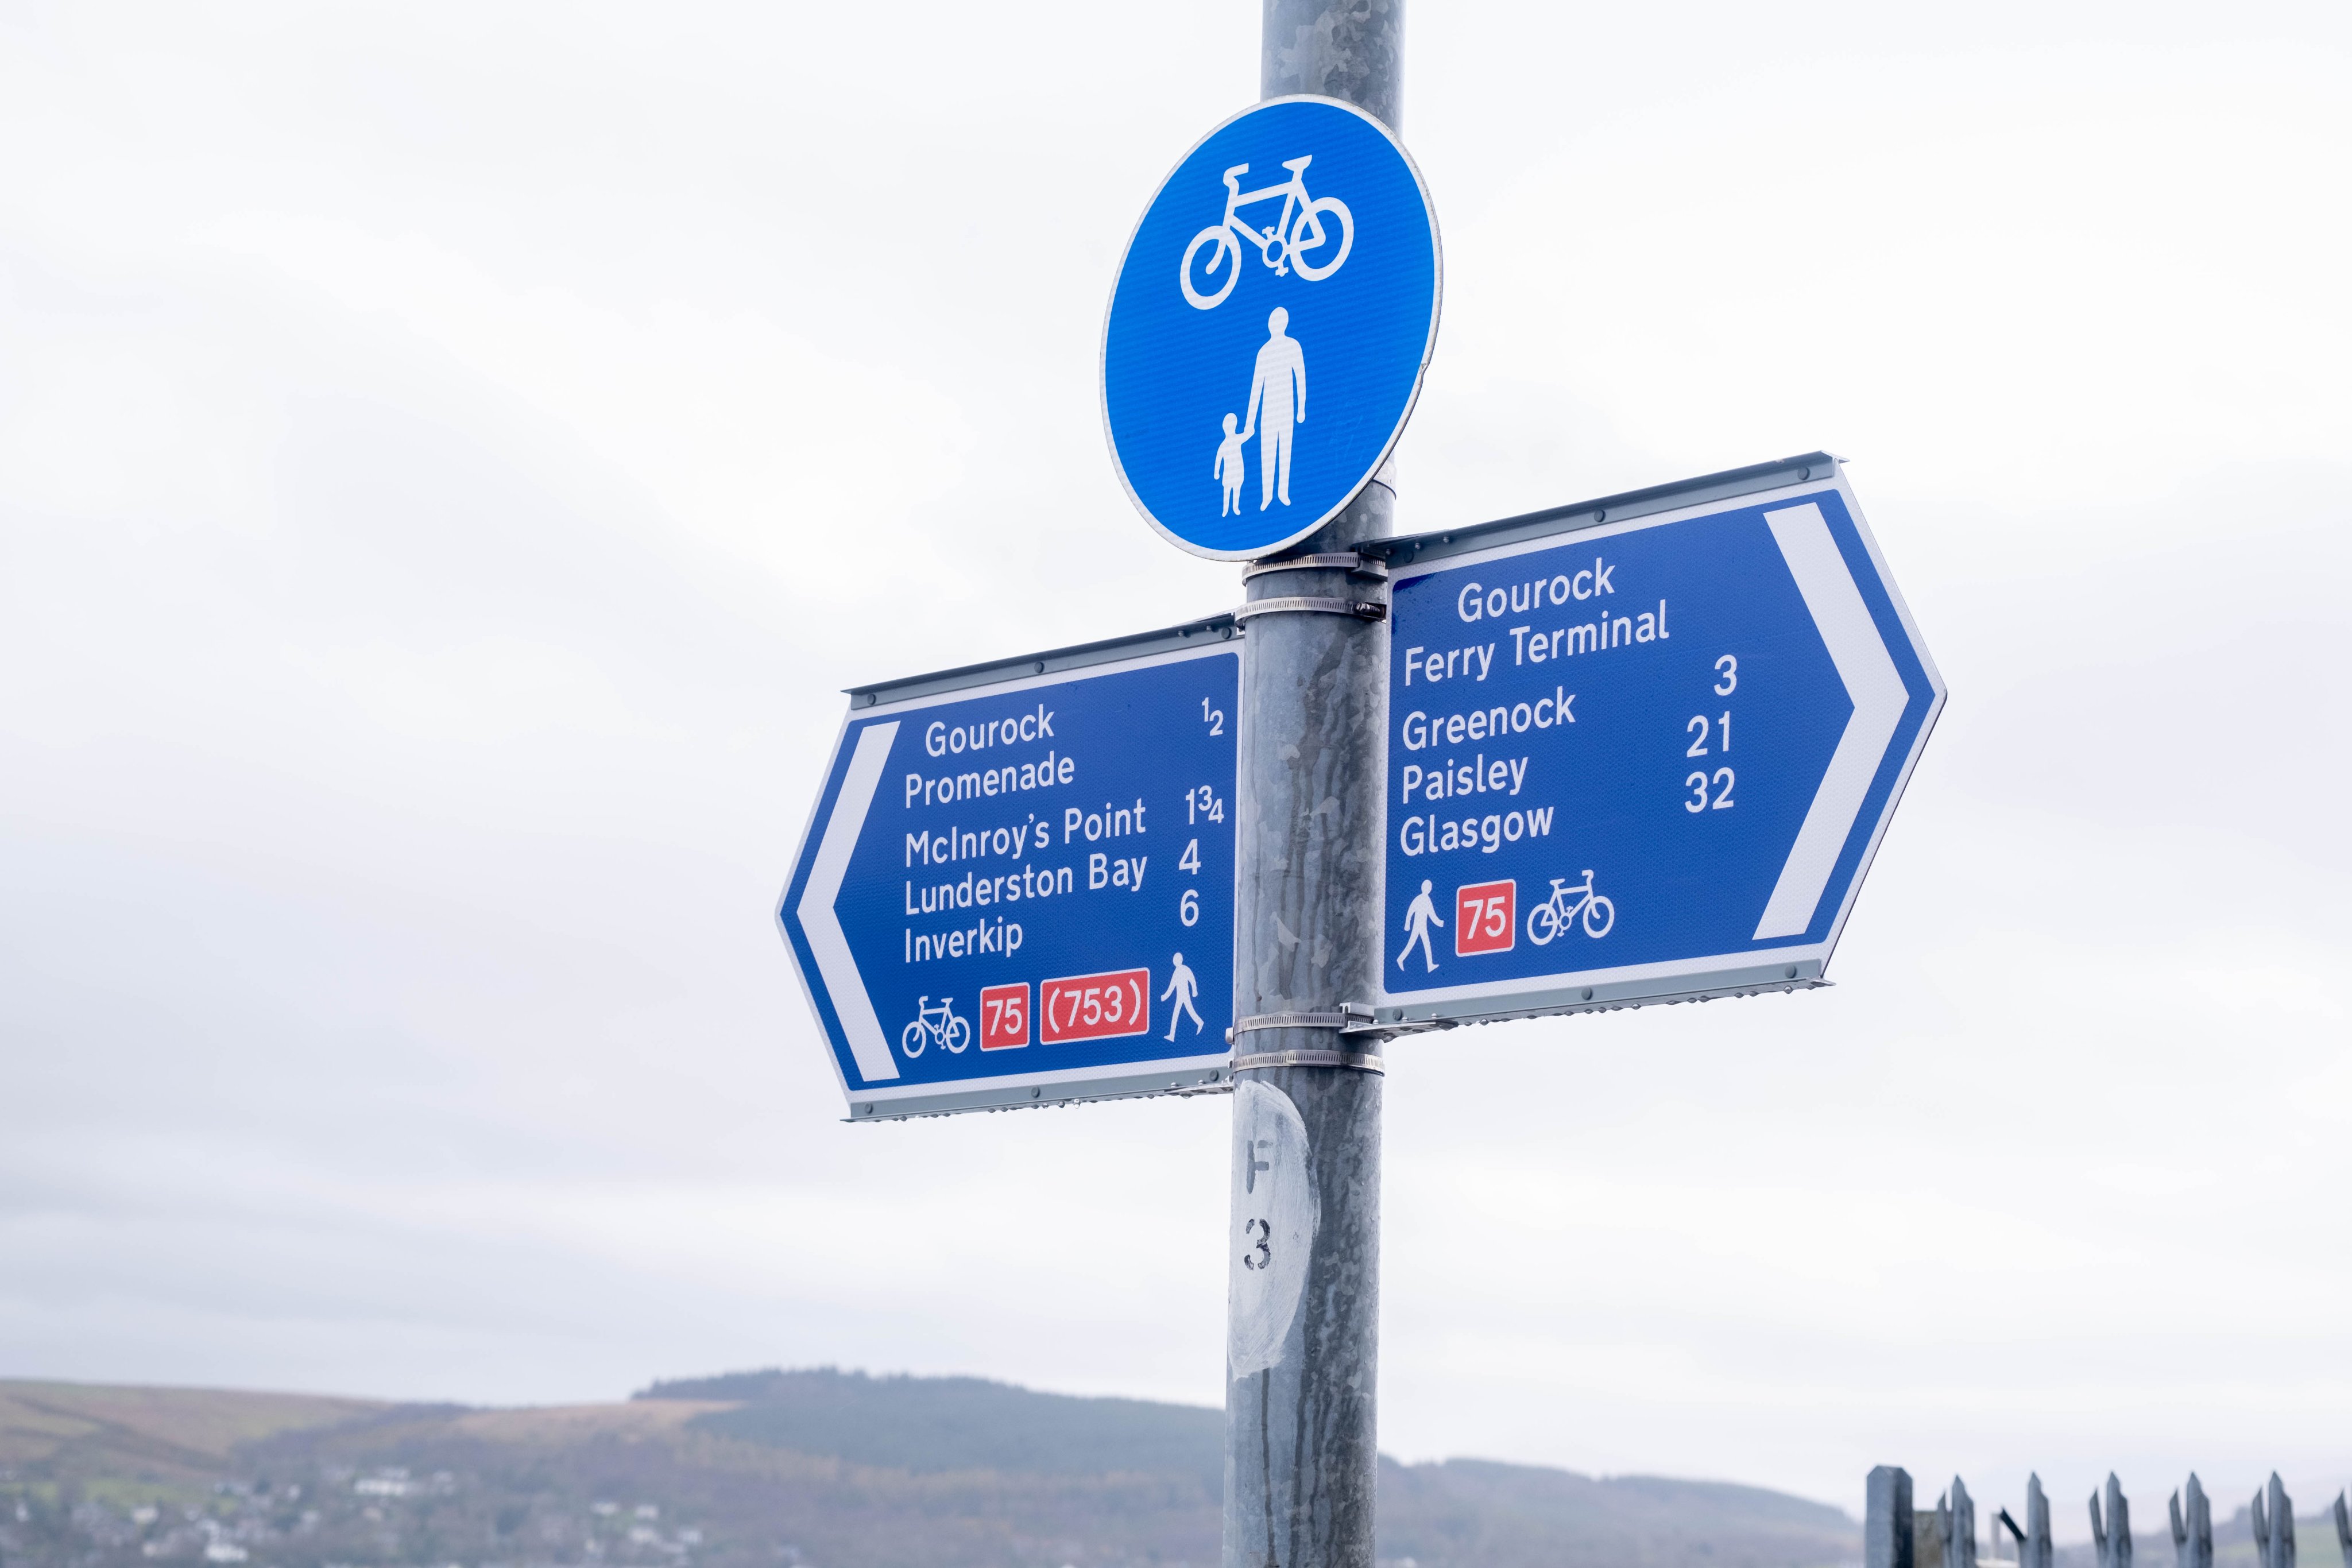 Gourock train station's new active travel route officially opened